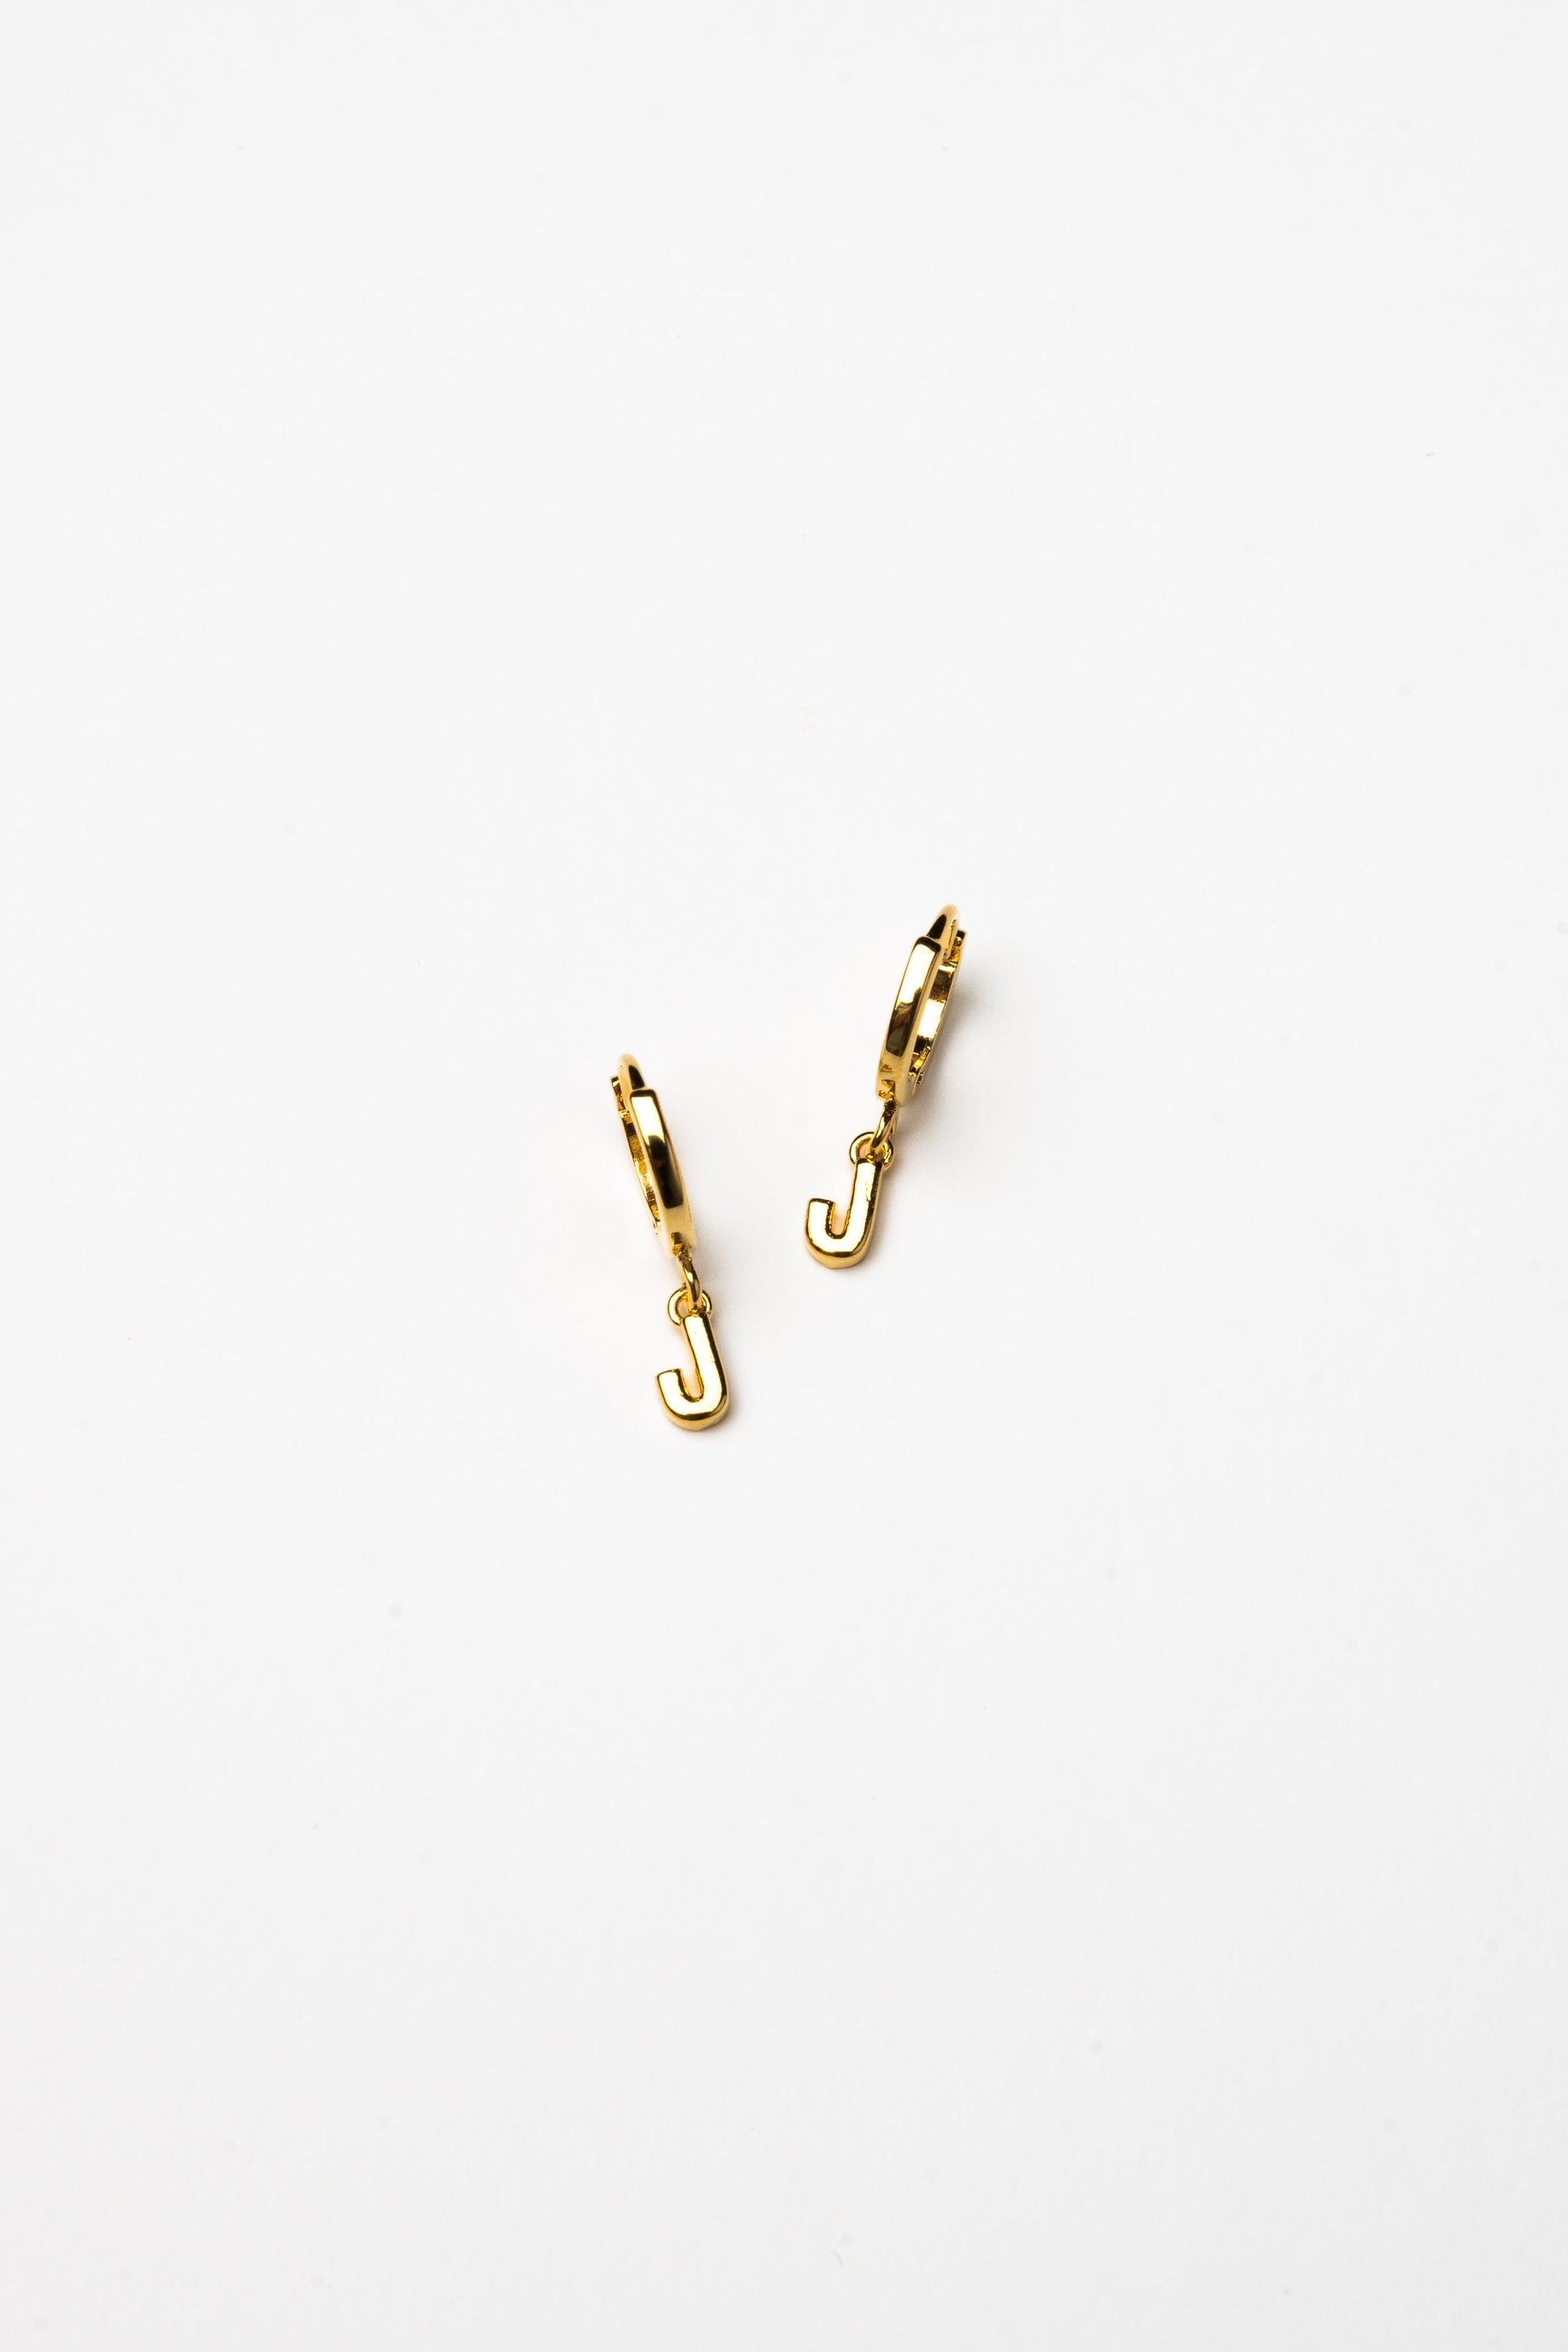 Cove Initial Letter Huggie Earrings WOMEN'S EARINGS Cove Accessories J 18k Gold Plated 